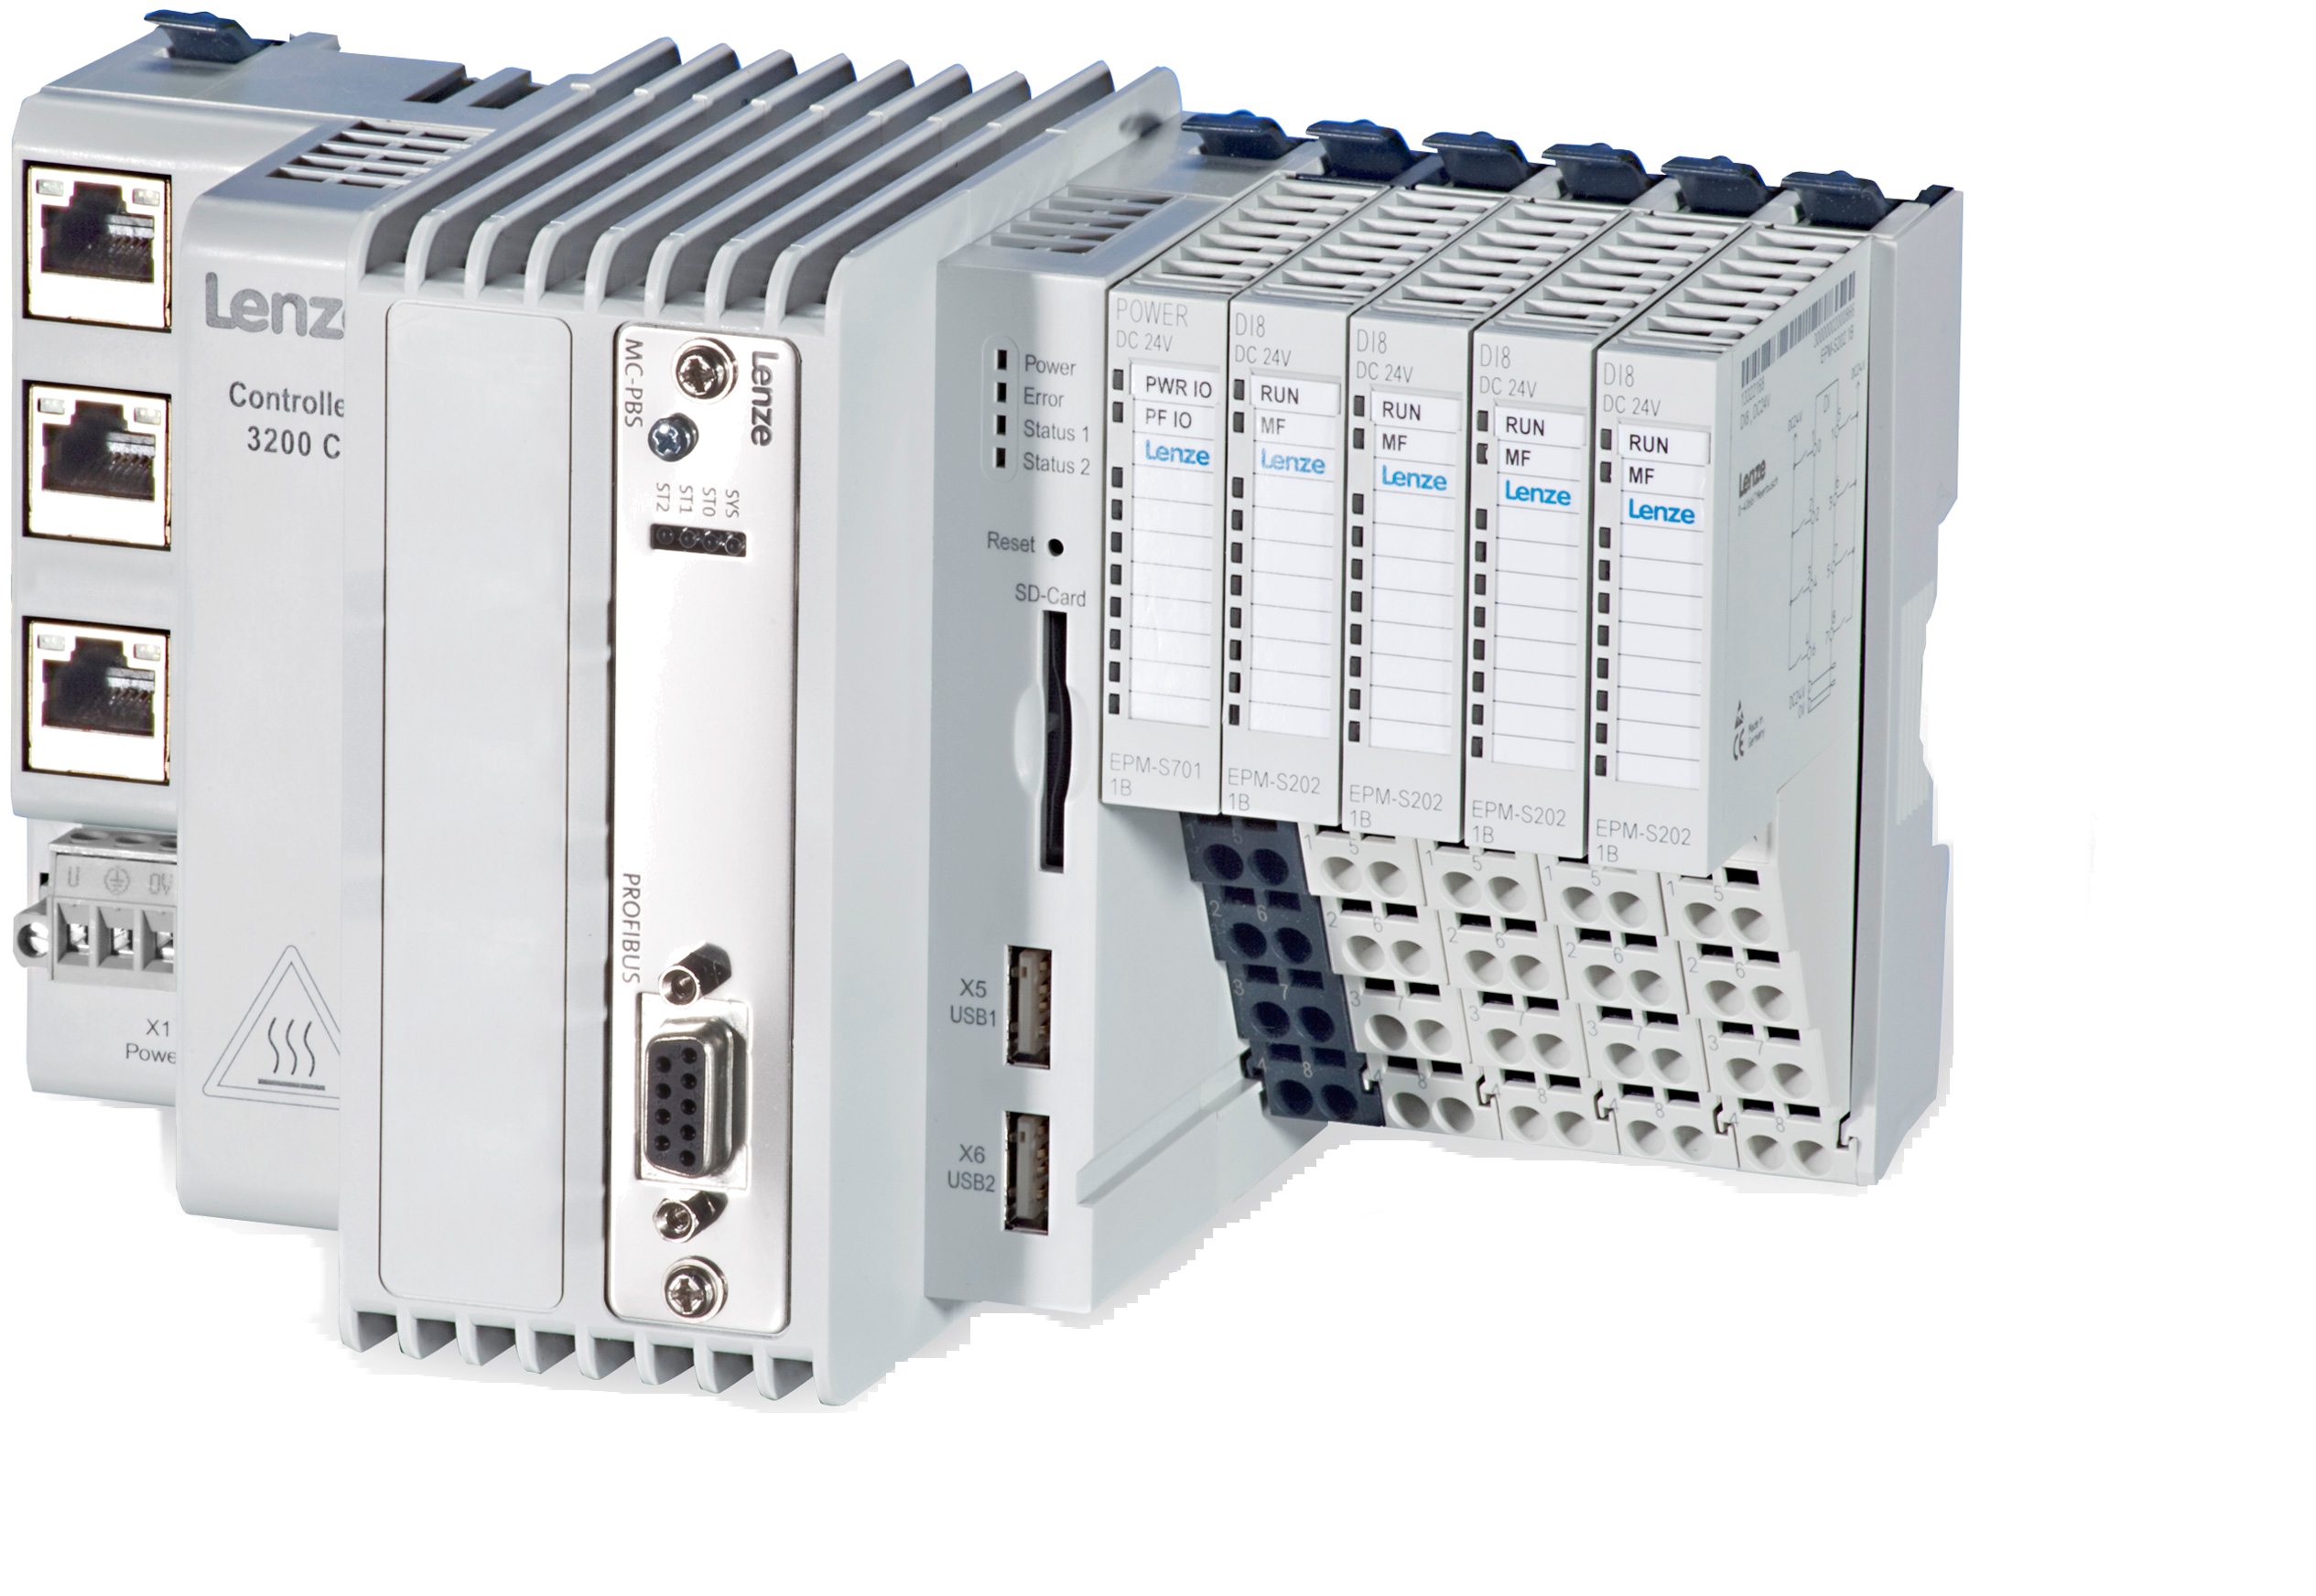 Lenze Controller-Based Automation